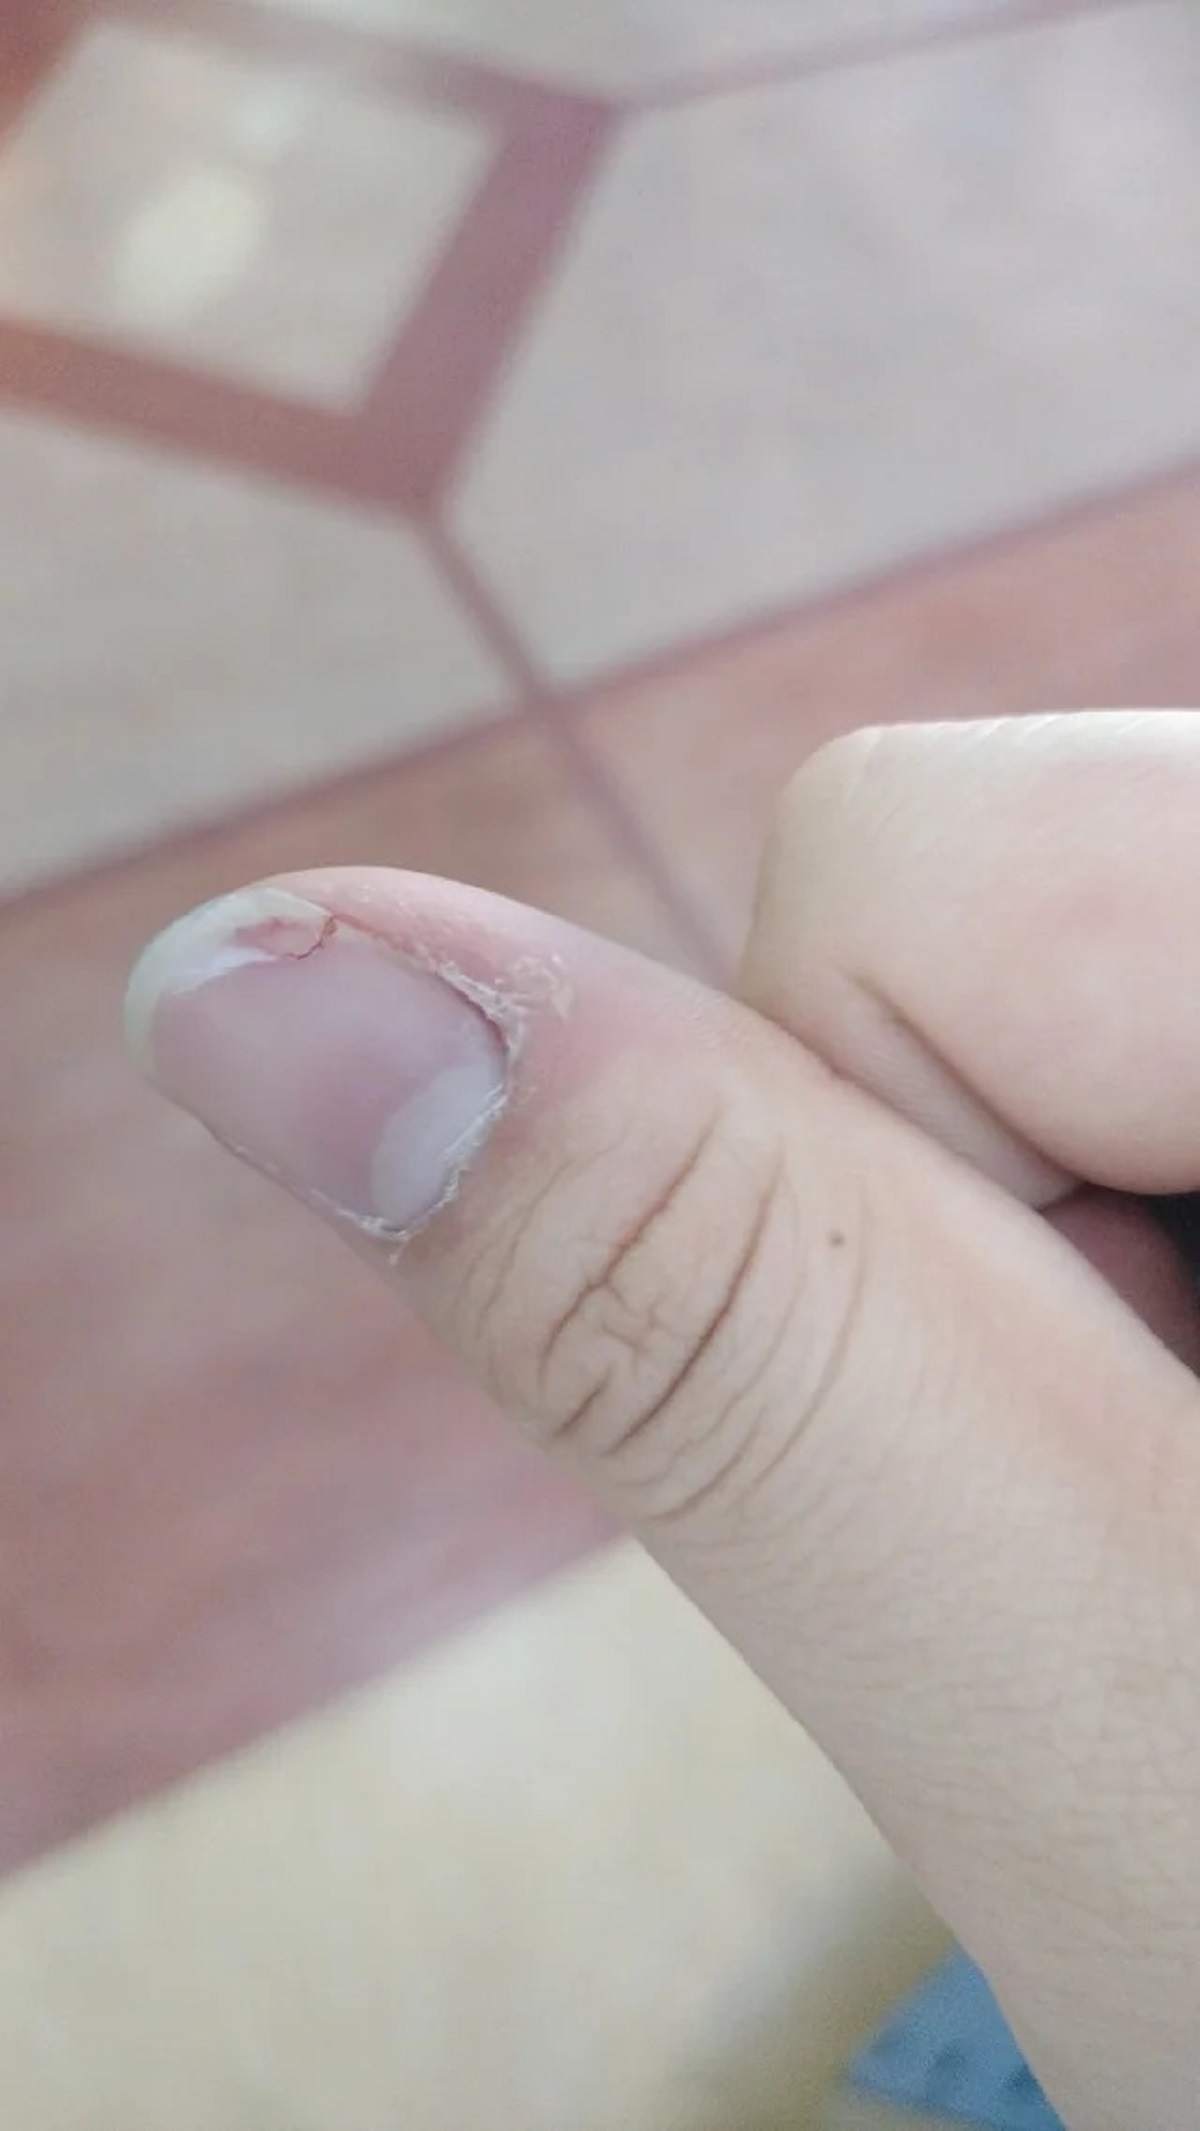 The nail of my thumb while playing bowling